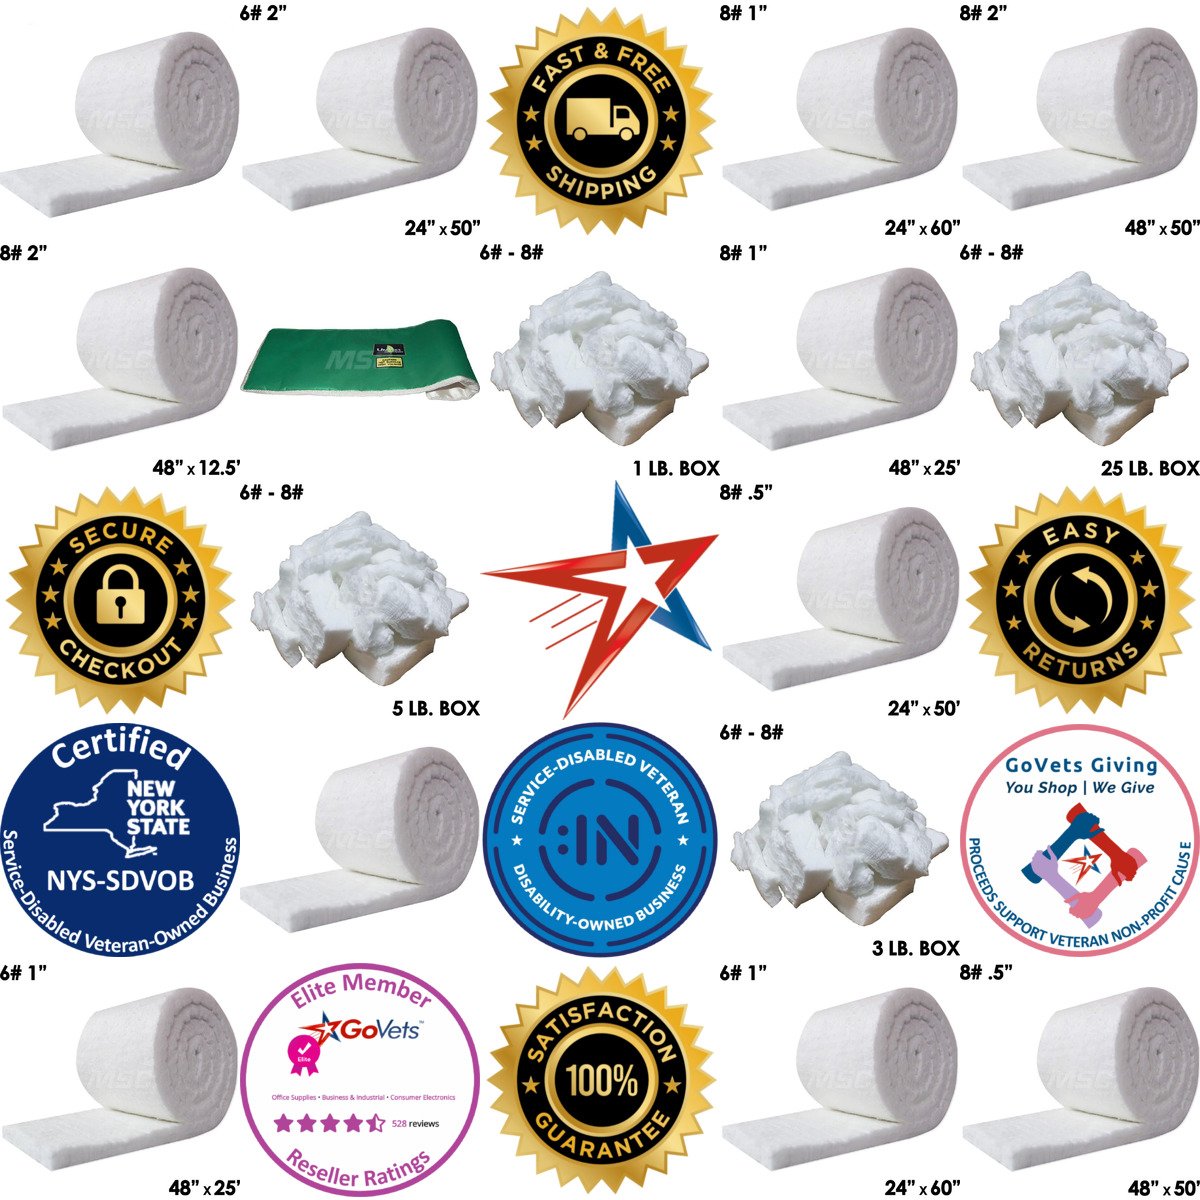 A selection of Unitherm products on GoVets